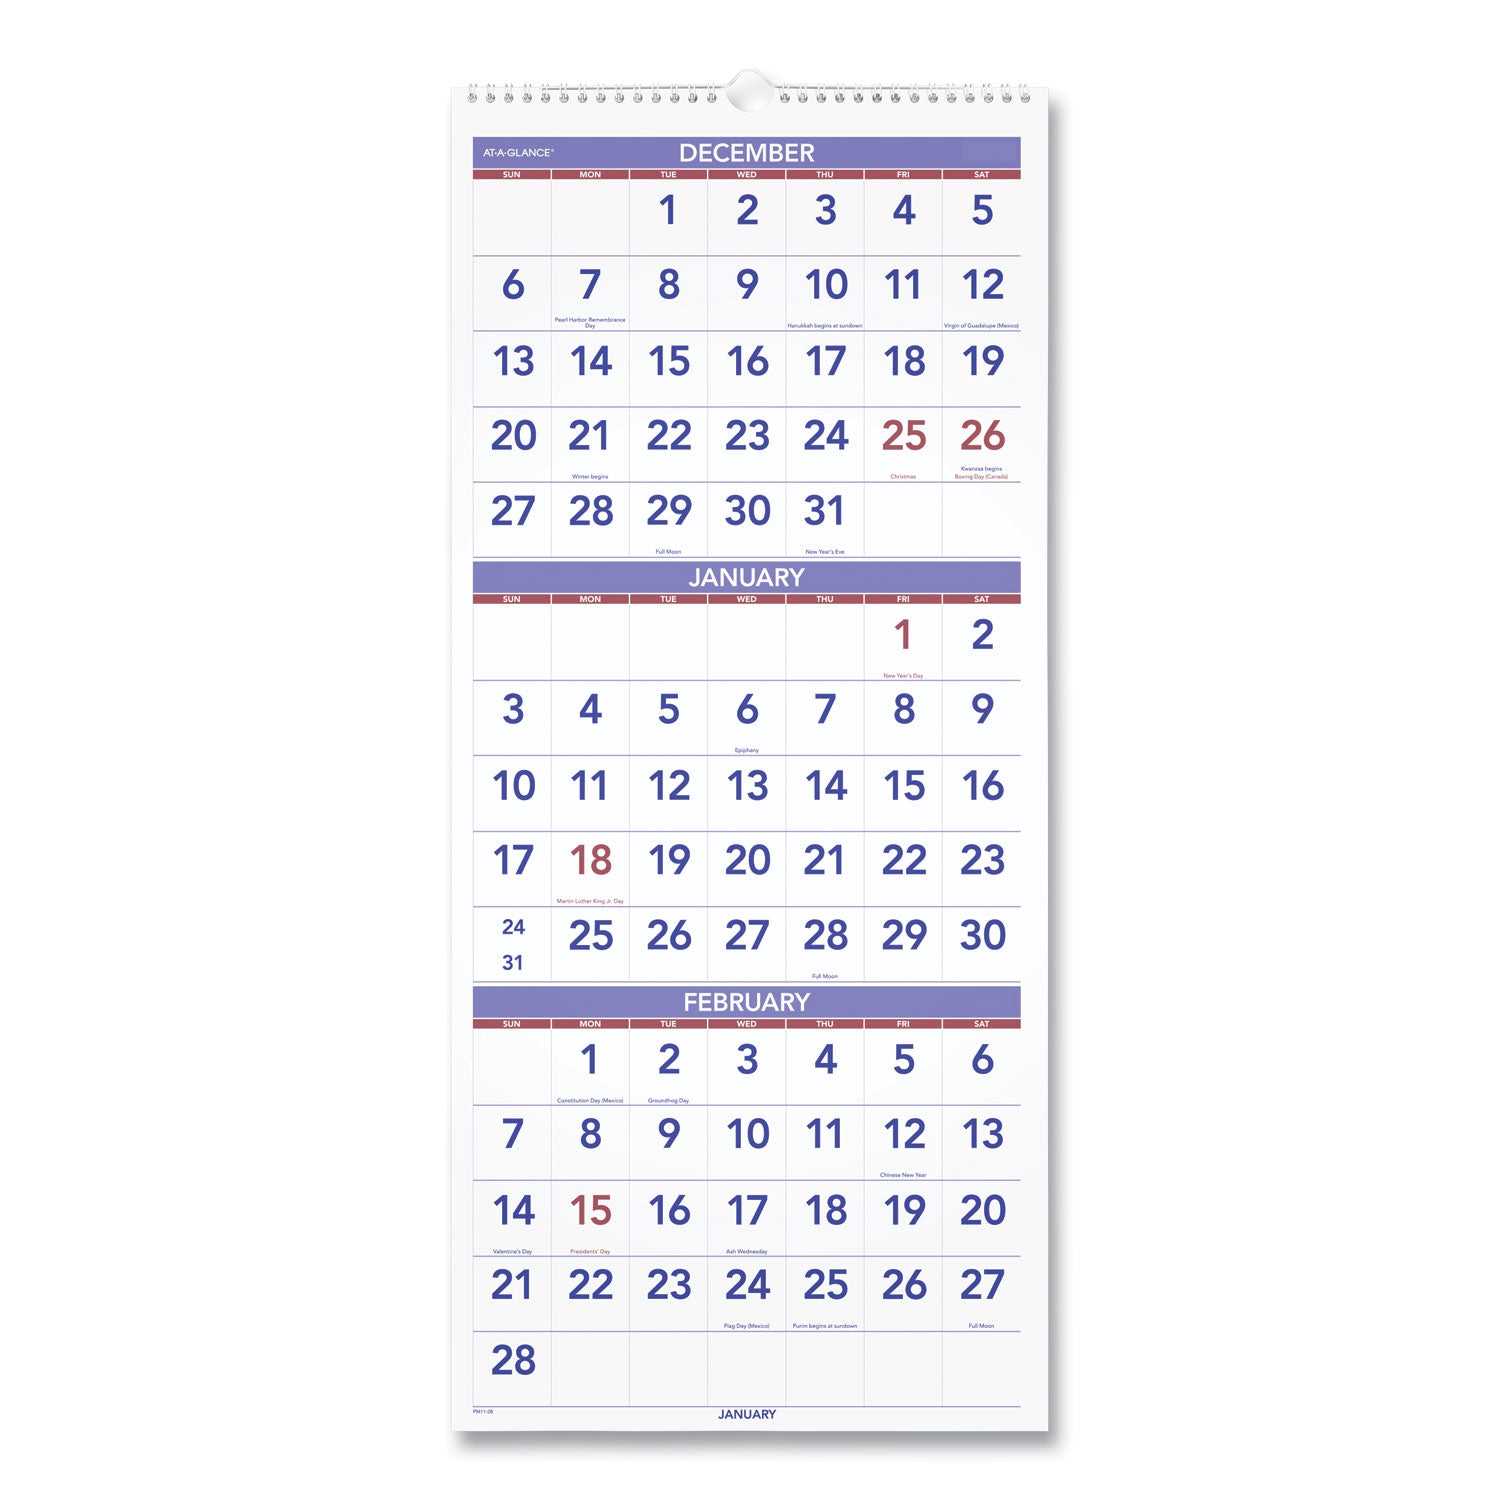 deluxe-three-month-reference-wall-calendar-vertical-orientation-12-x-27-white-sheets-14-month-dec-to-jan-2023-to-2025_aagpm1128 - 1